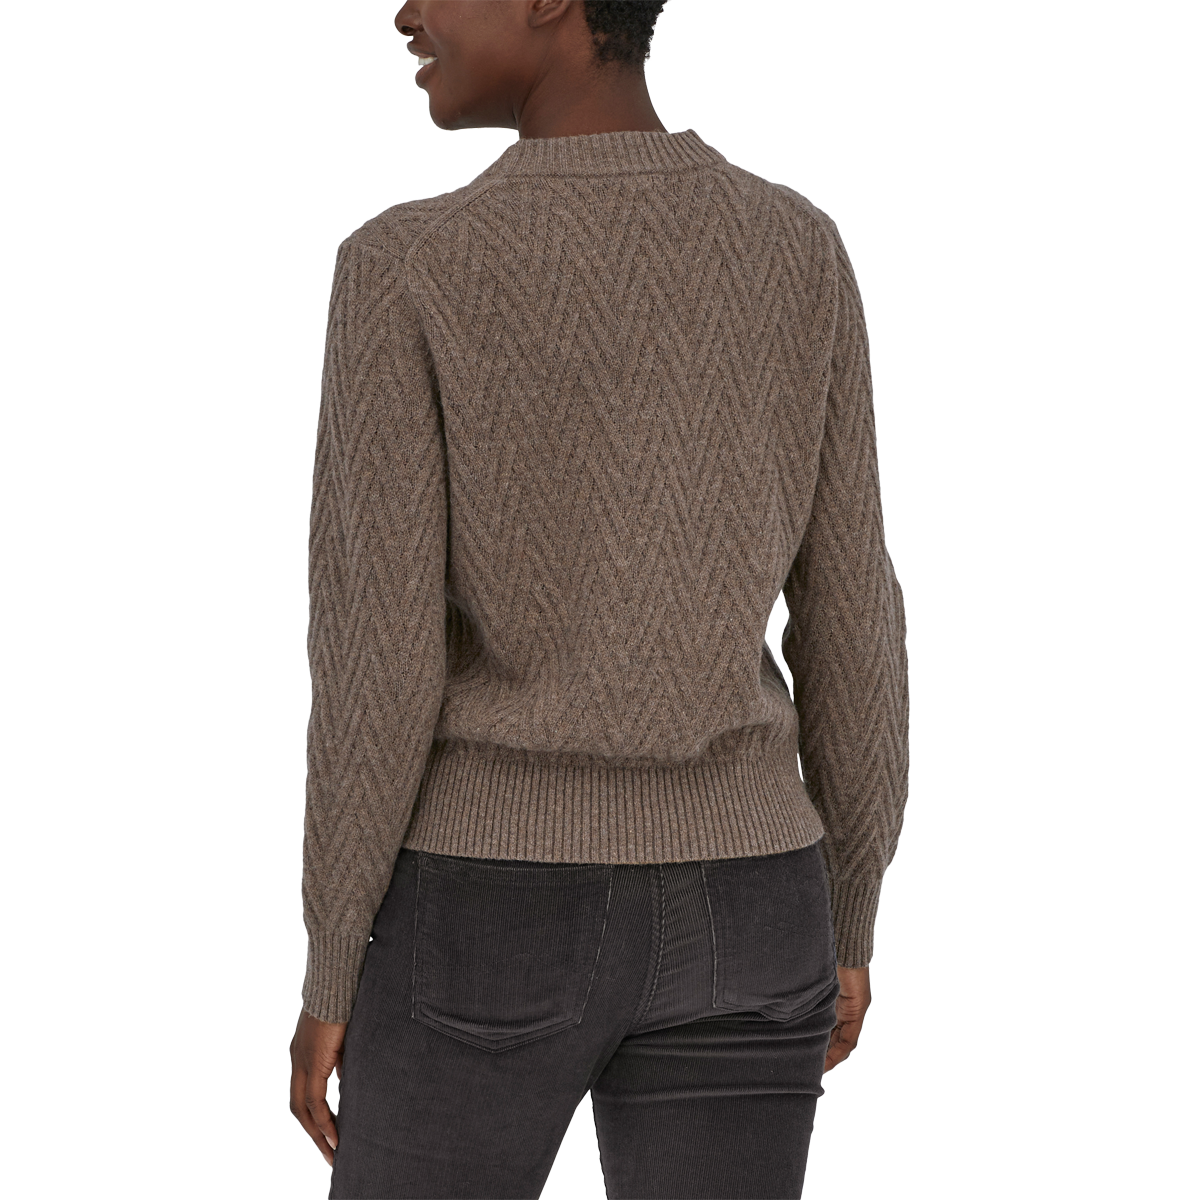 Women's Recycled Wool Crewneck Sweater alternate view